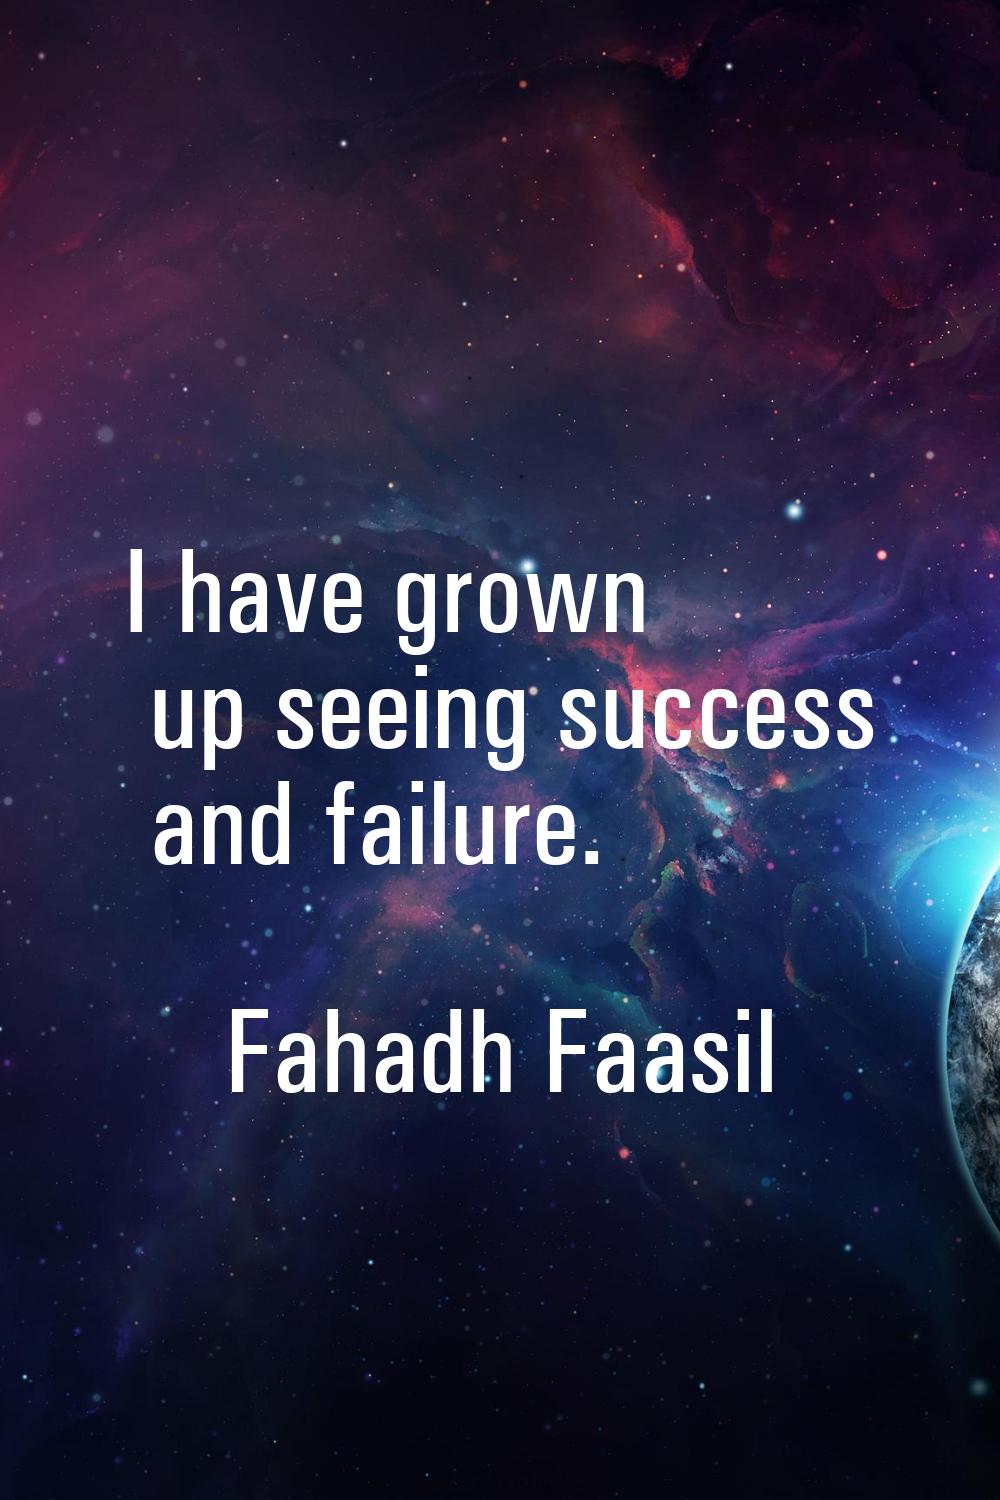 I have grown up seeing success and failure.